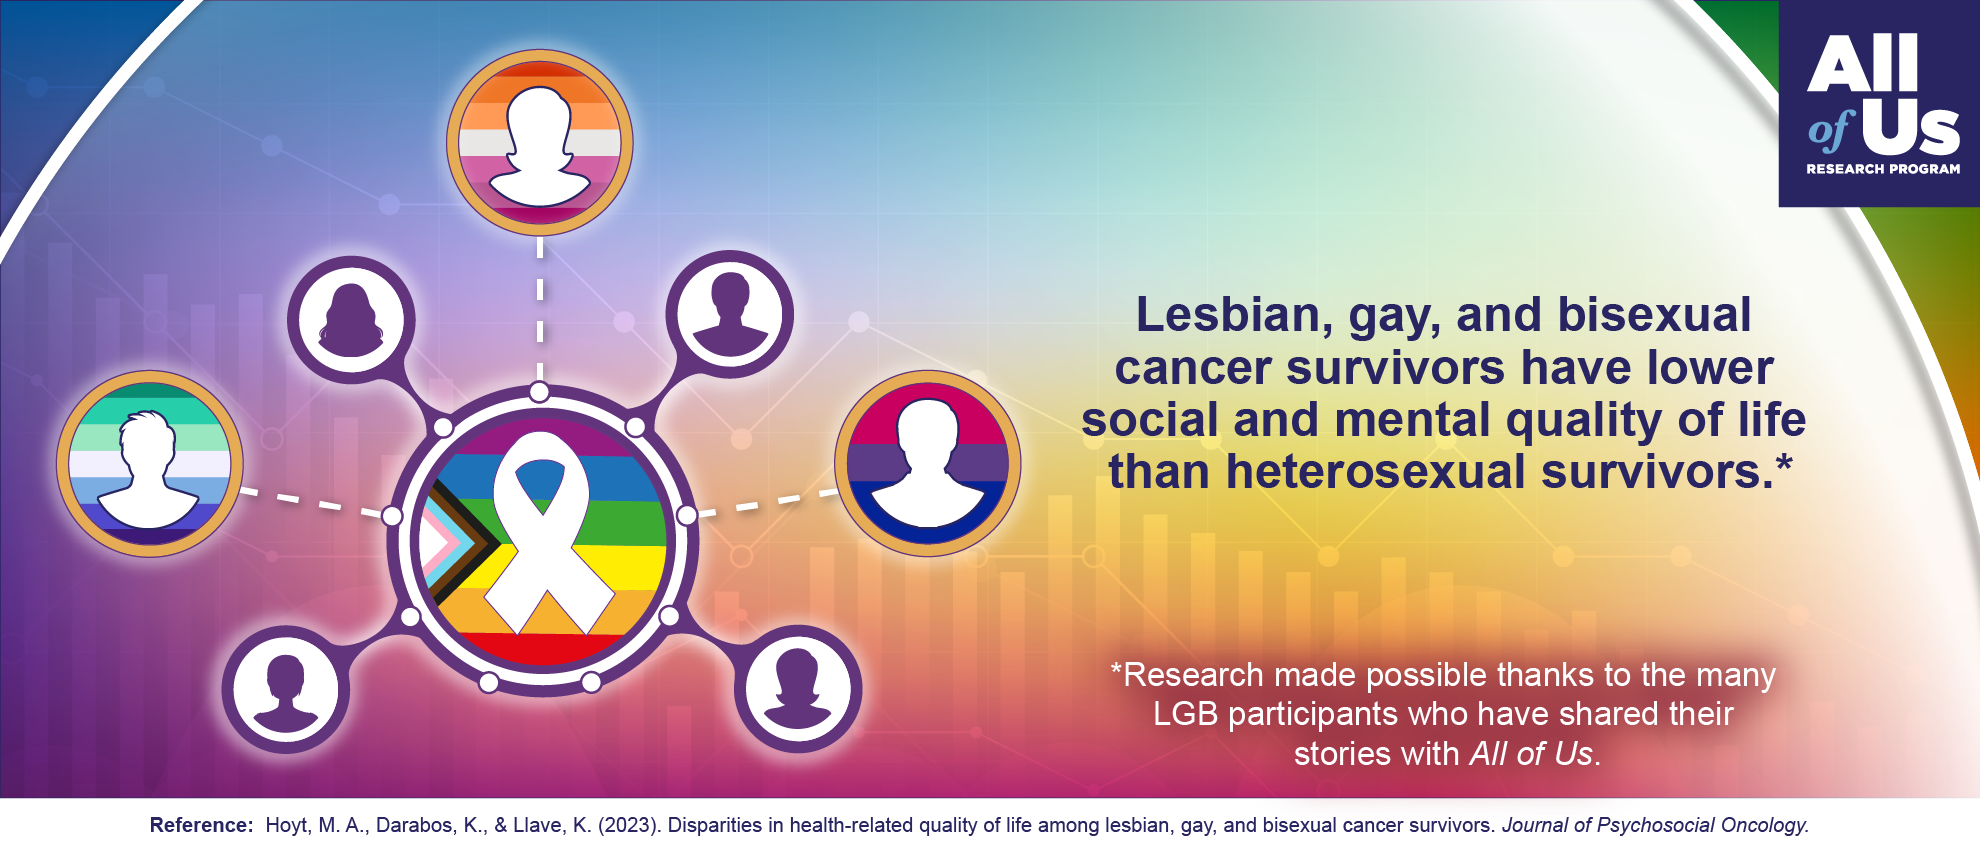 Lesbian, gay, and bisexual cancer survivors have lower social and mental quality of life than heterosexual survivors. Research made possible thanks to the many LGB participants who have shared their stories with All of Us. Reference: Hoyt, M.A.; Darabos, K.; and Llave, K. (2023). Disparities in health-related quality of life among lesbian, gay, and bisexual cancer survivors. Journal of Psychological Oncology. Logo of the All of Us Research Program.